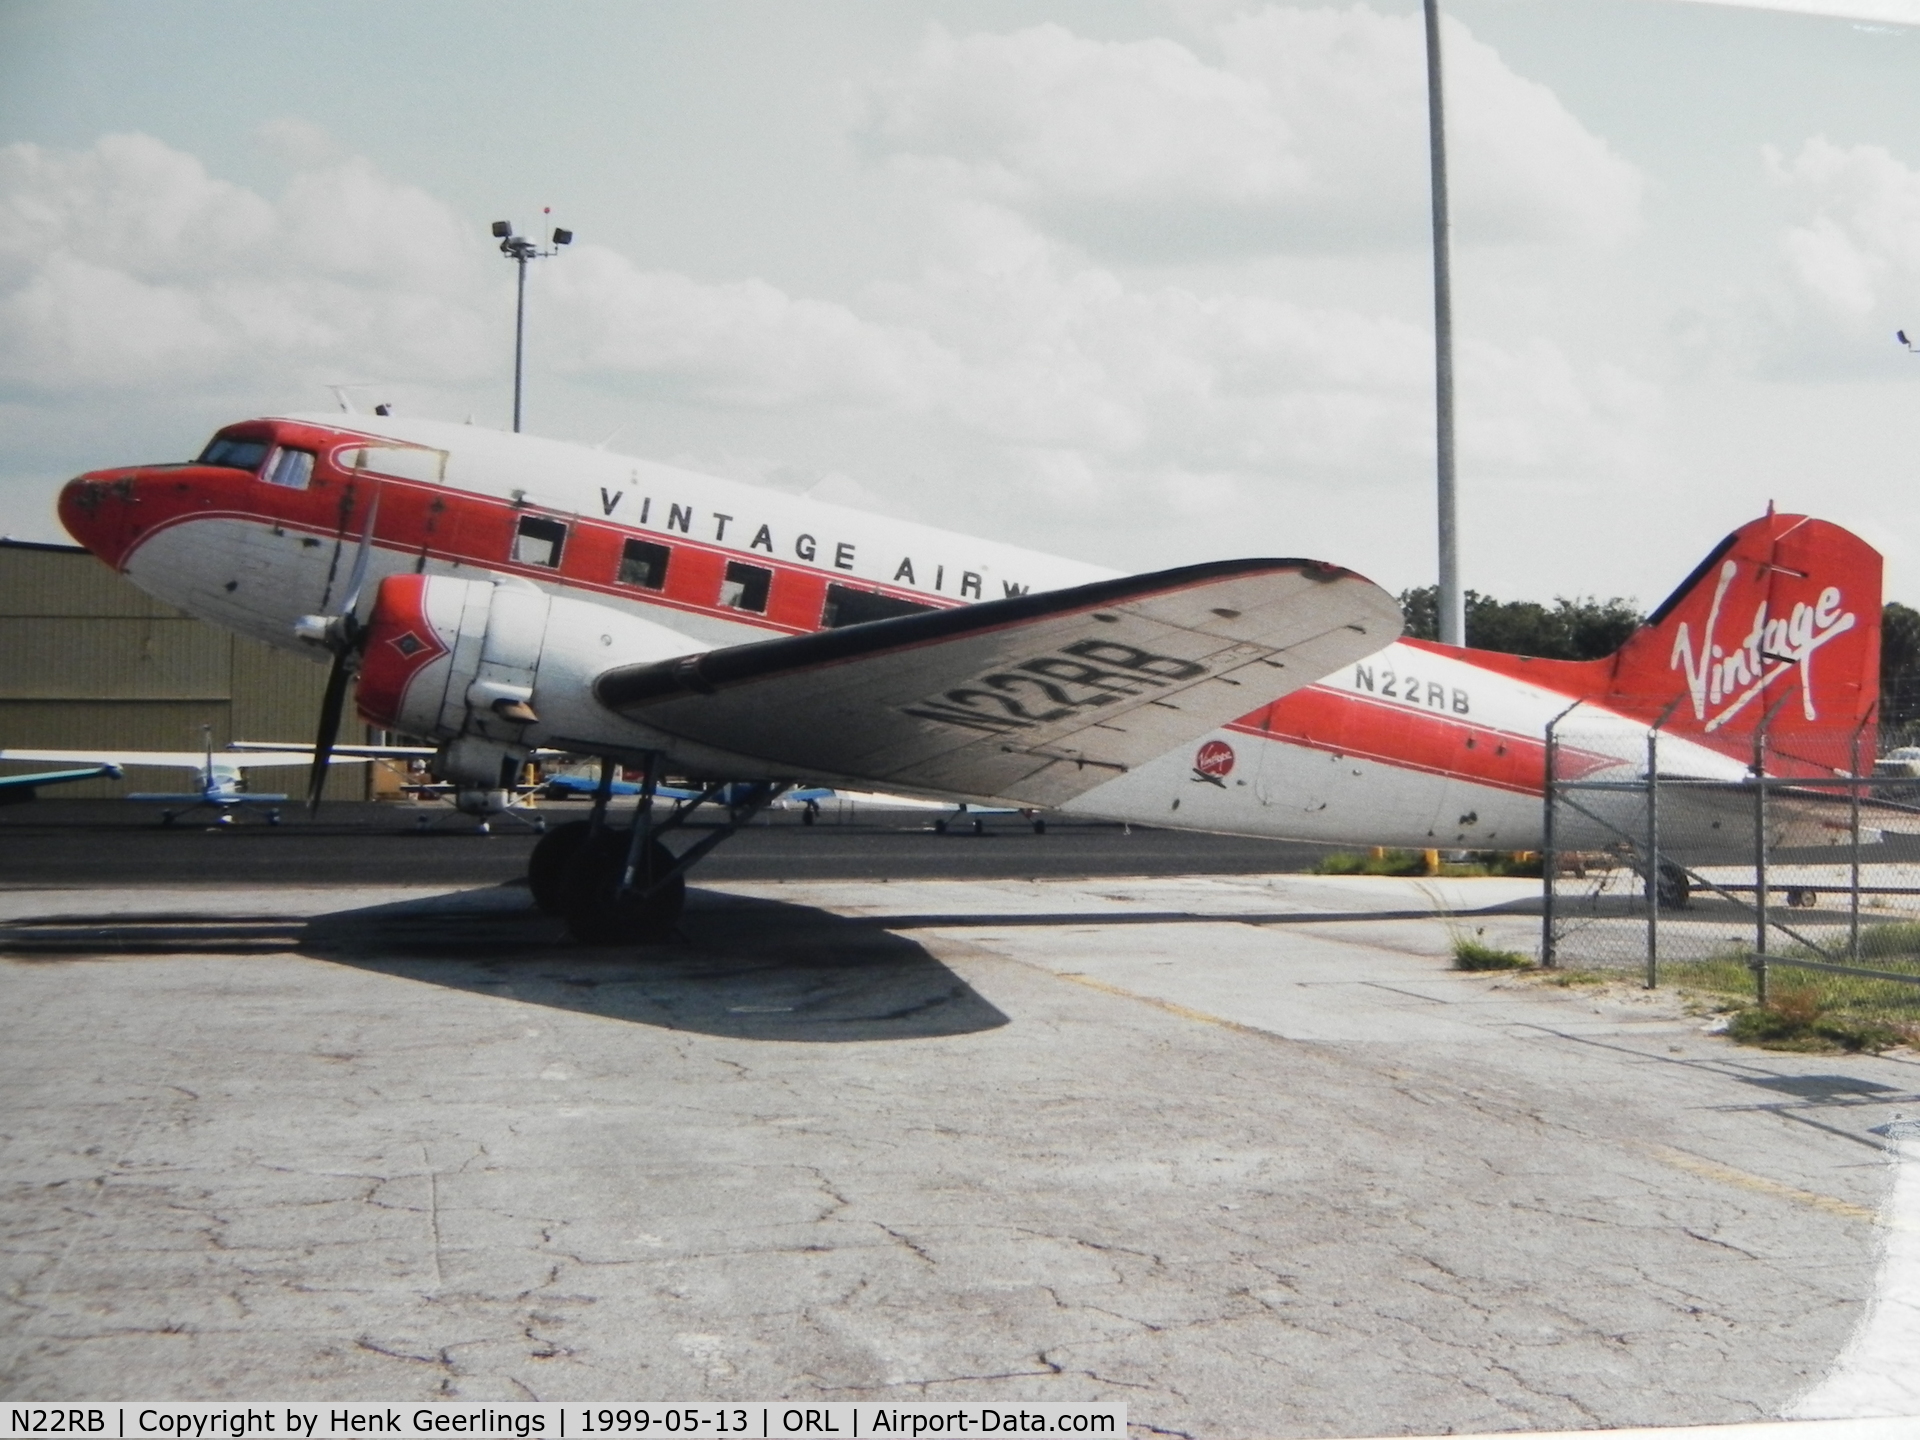 N22RB, 1945 Douglas DC3A C/N 4926, Vintage Airways ; Scan from photo I made in 1999